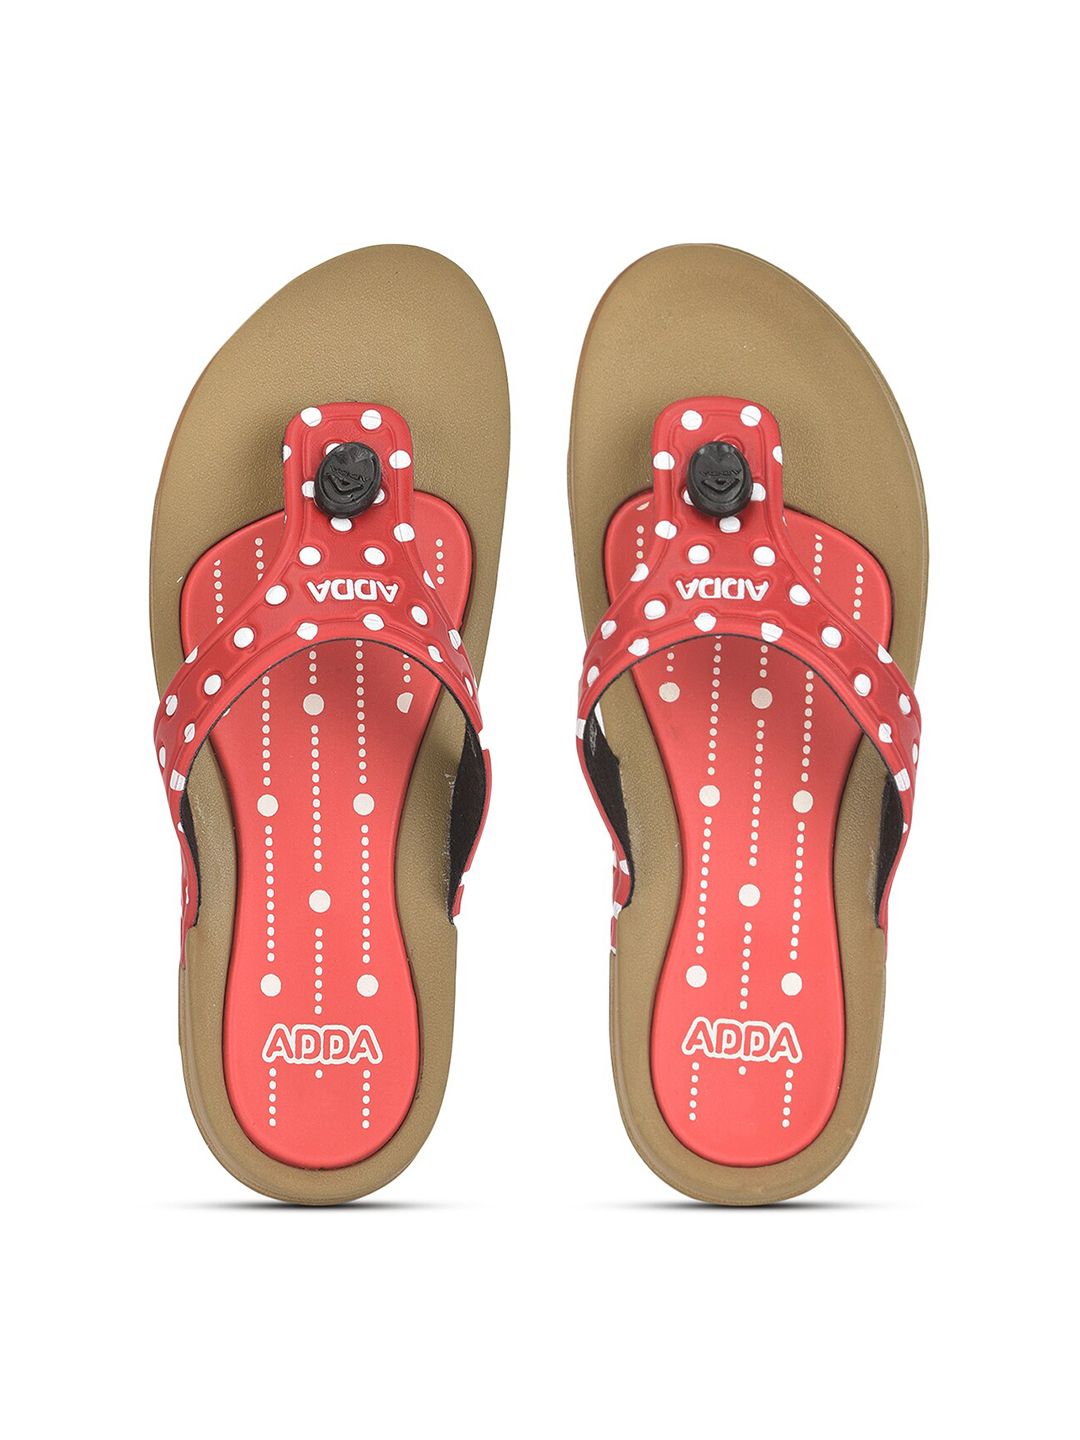 Adda Women Beige & Red Printed Rubber Thong Flip-Flops Price in India